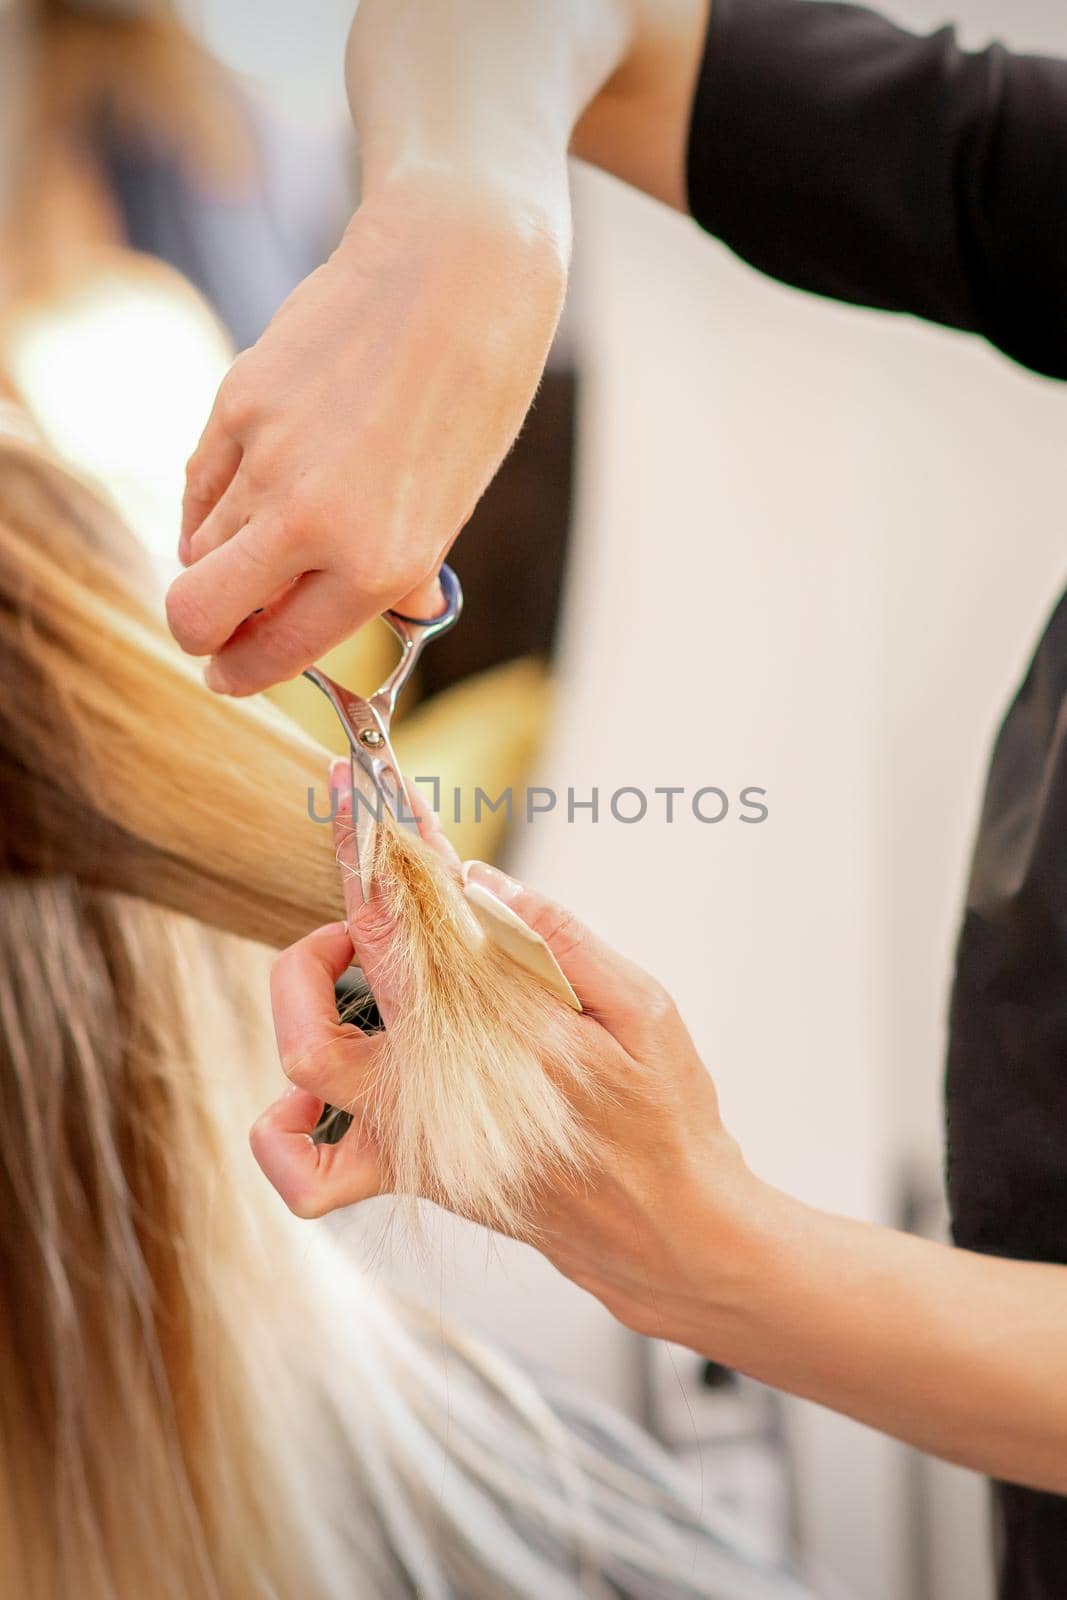 Cutting female blonde hair. Hairdresser cuts hair of a young caucasian woman in a beauty salon close up. by okskukuruza